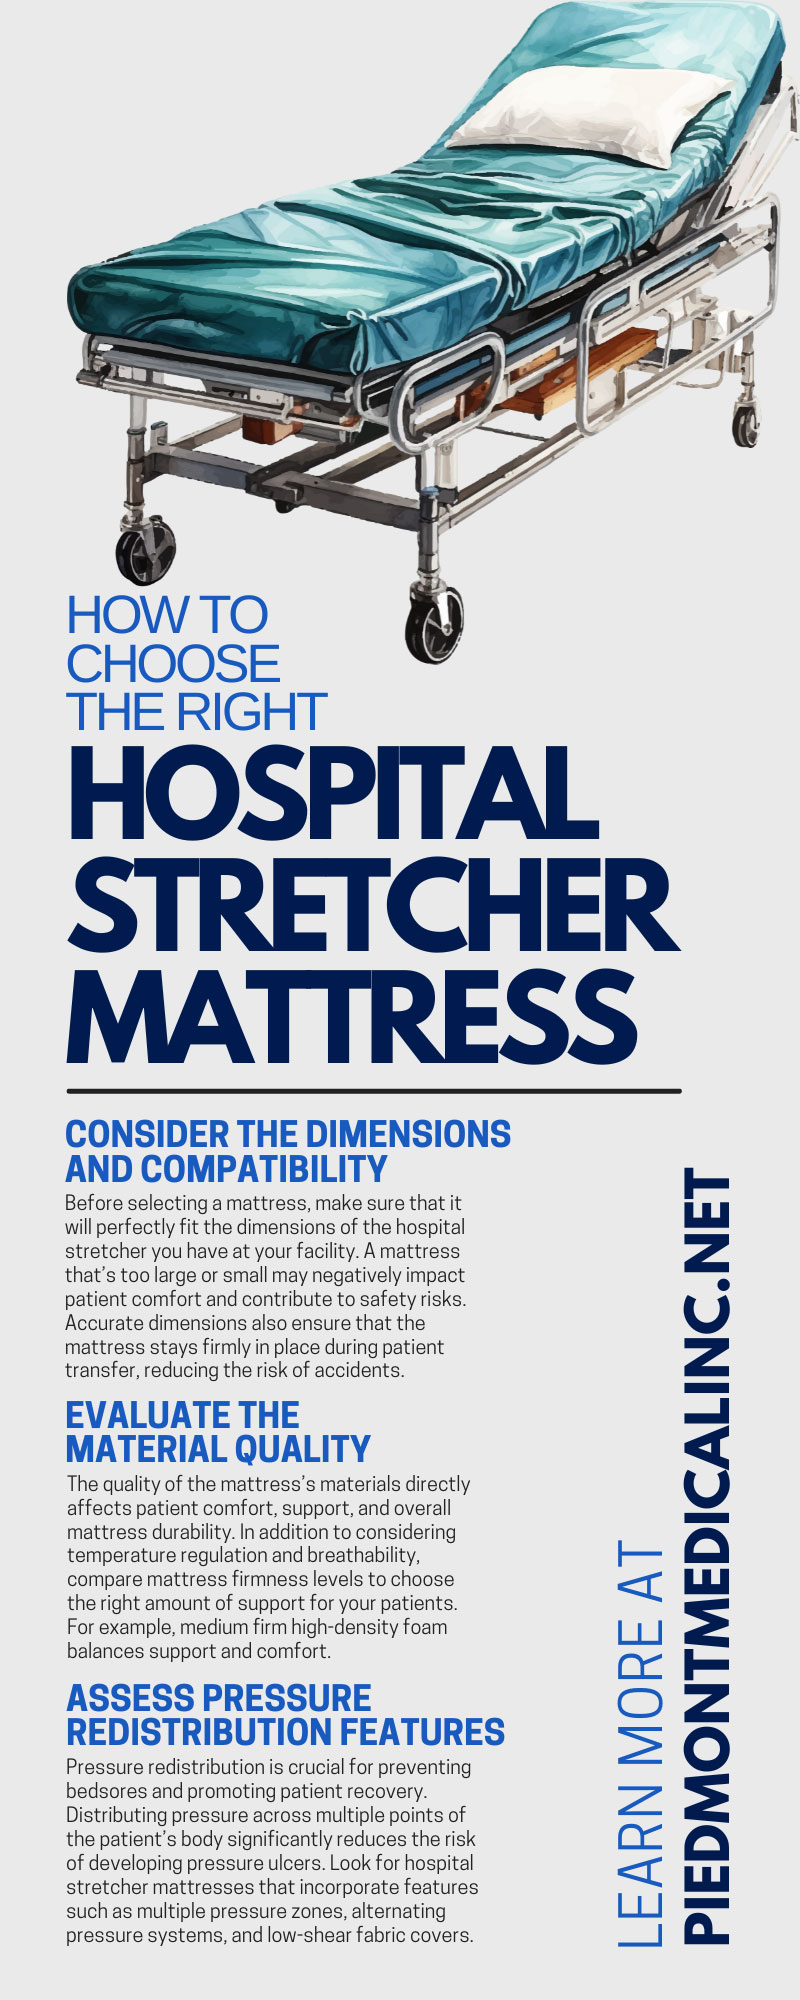 How To Choose the Right Hospital Stretcher Mattress
